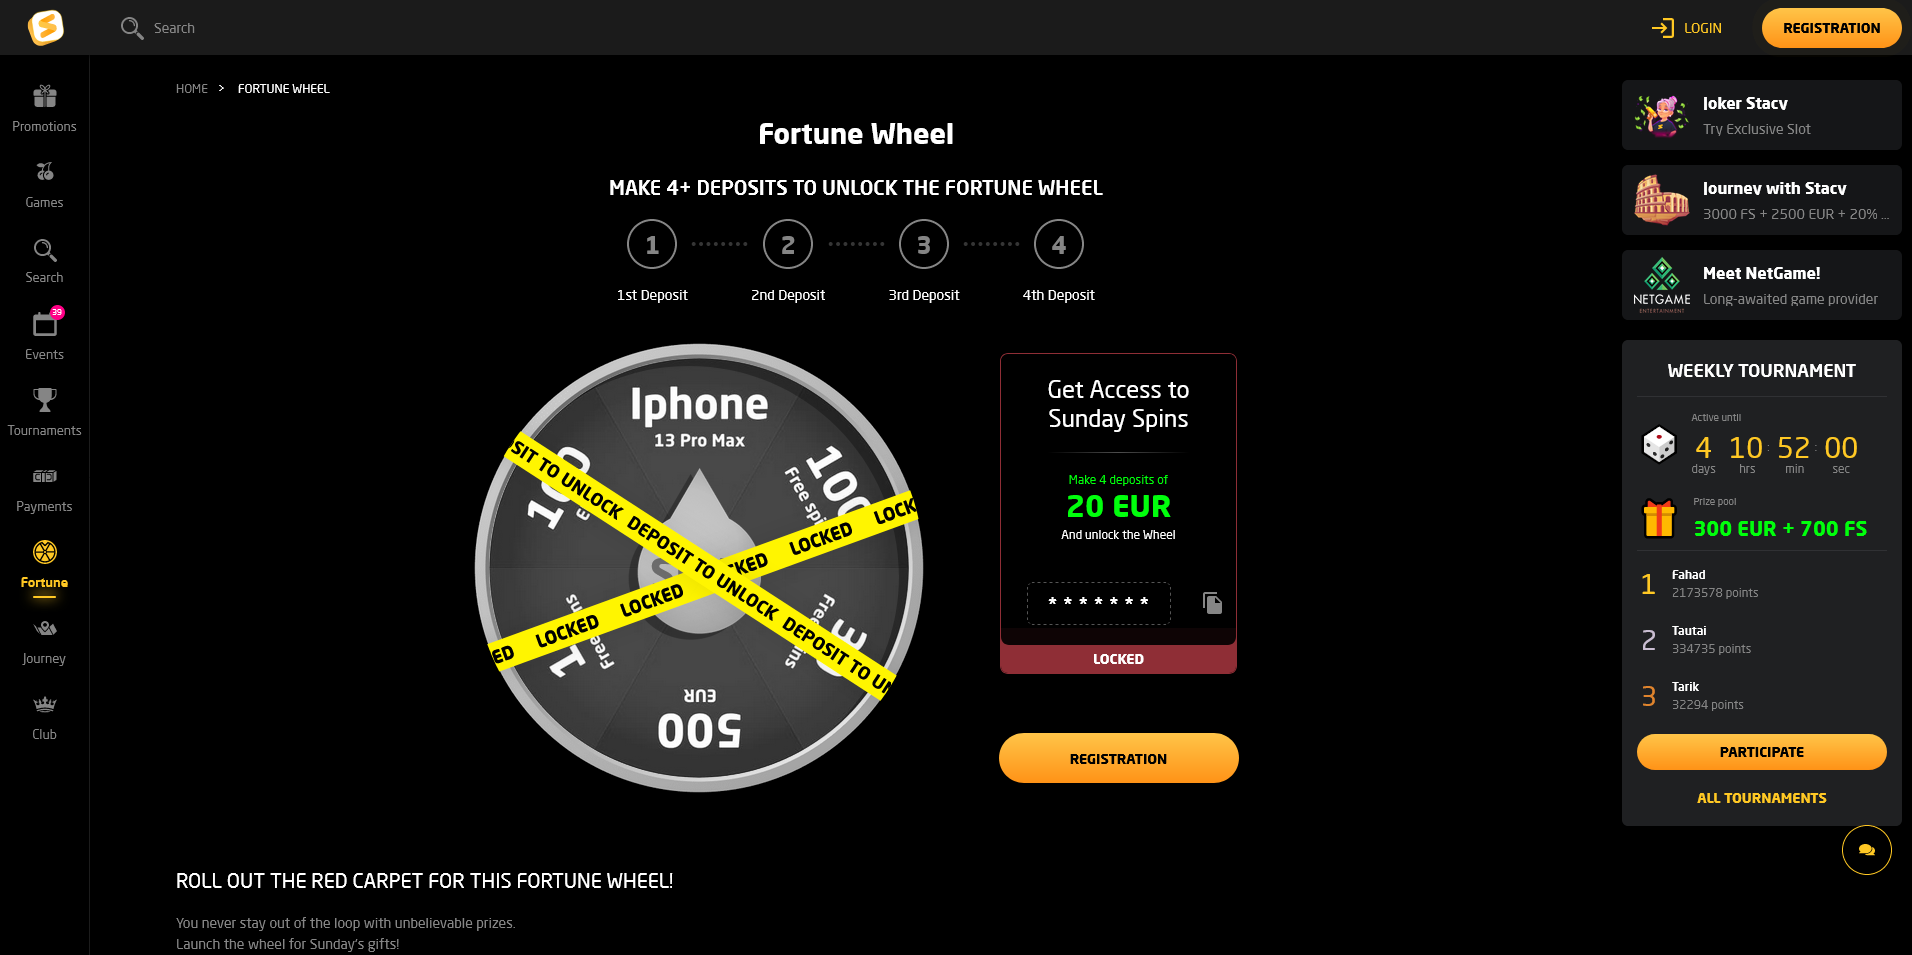 Screenshot of the Stay Casino Fortune Wheel page